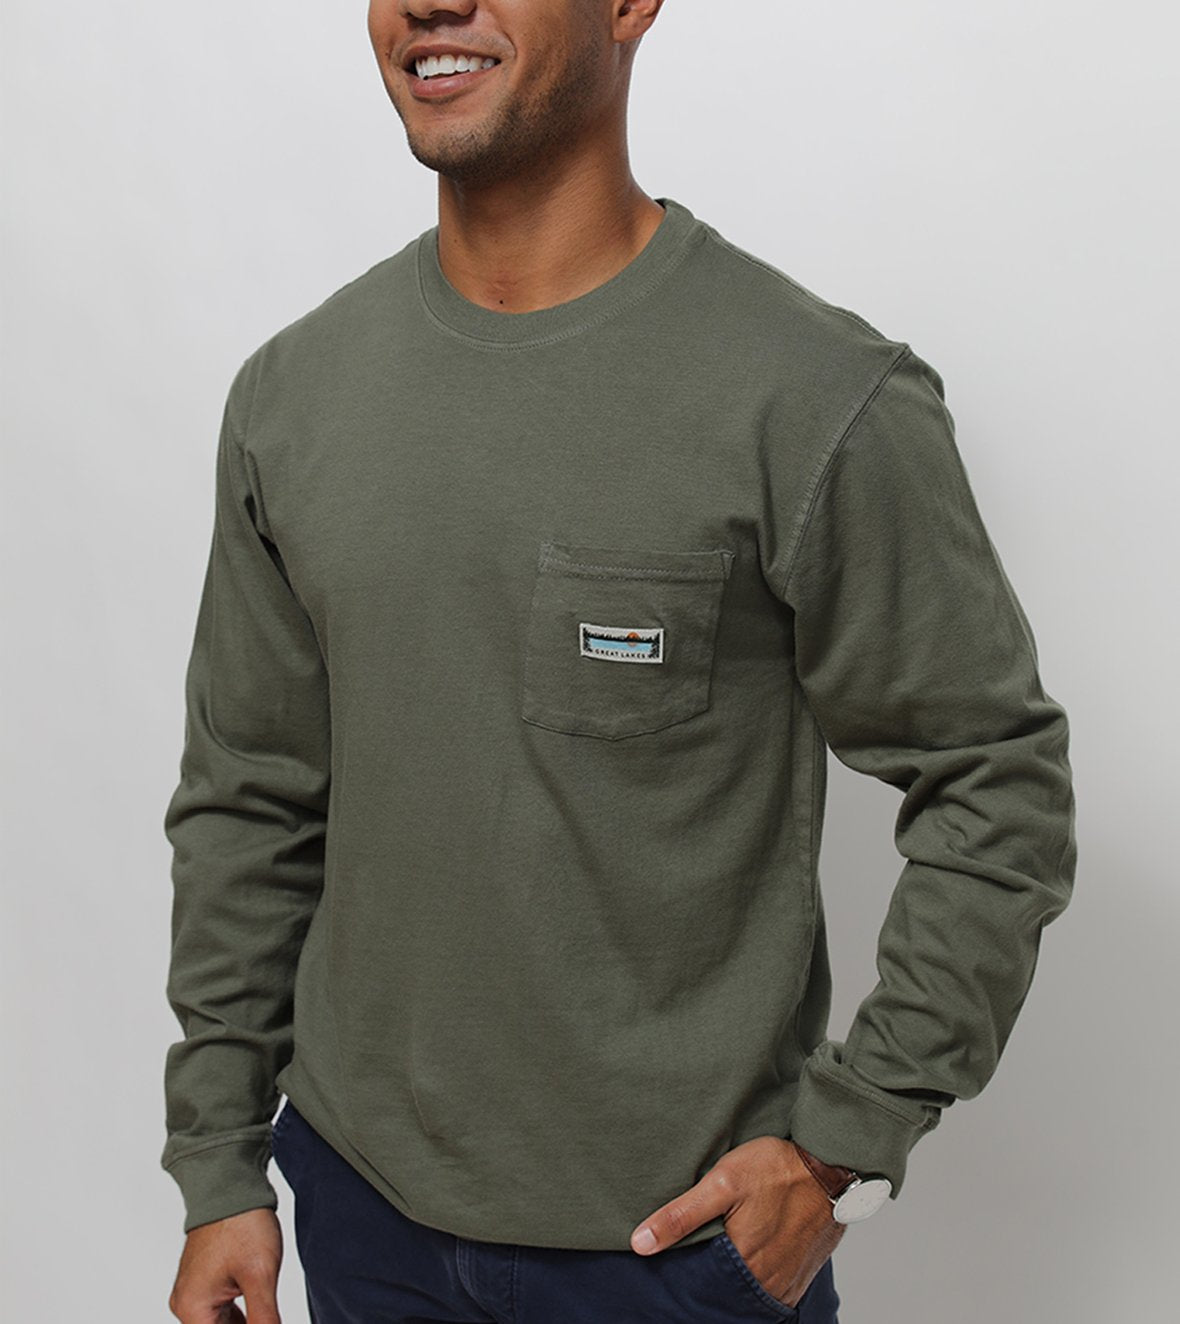 Lakeview Label Tee- Long Sleeve - The Lake and Company